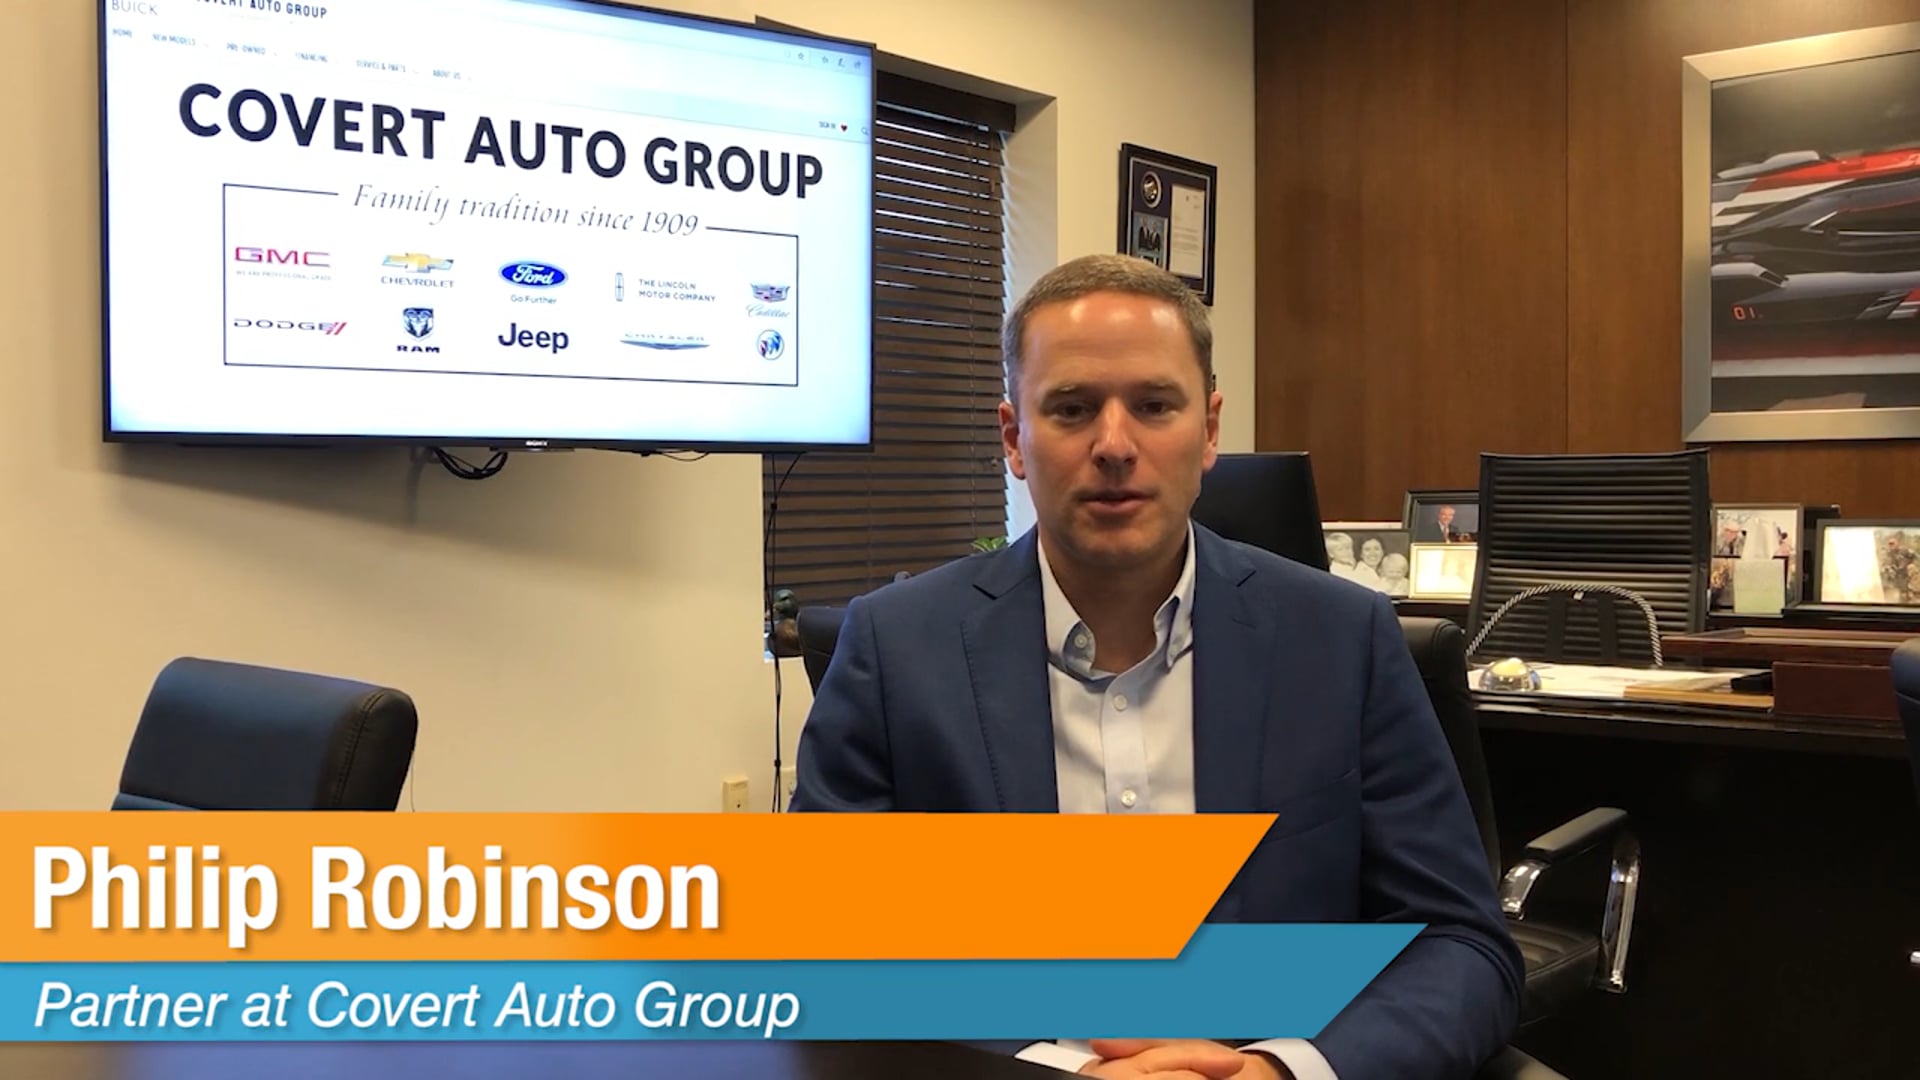 Success at Covert Auto Group - Philip Robinson